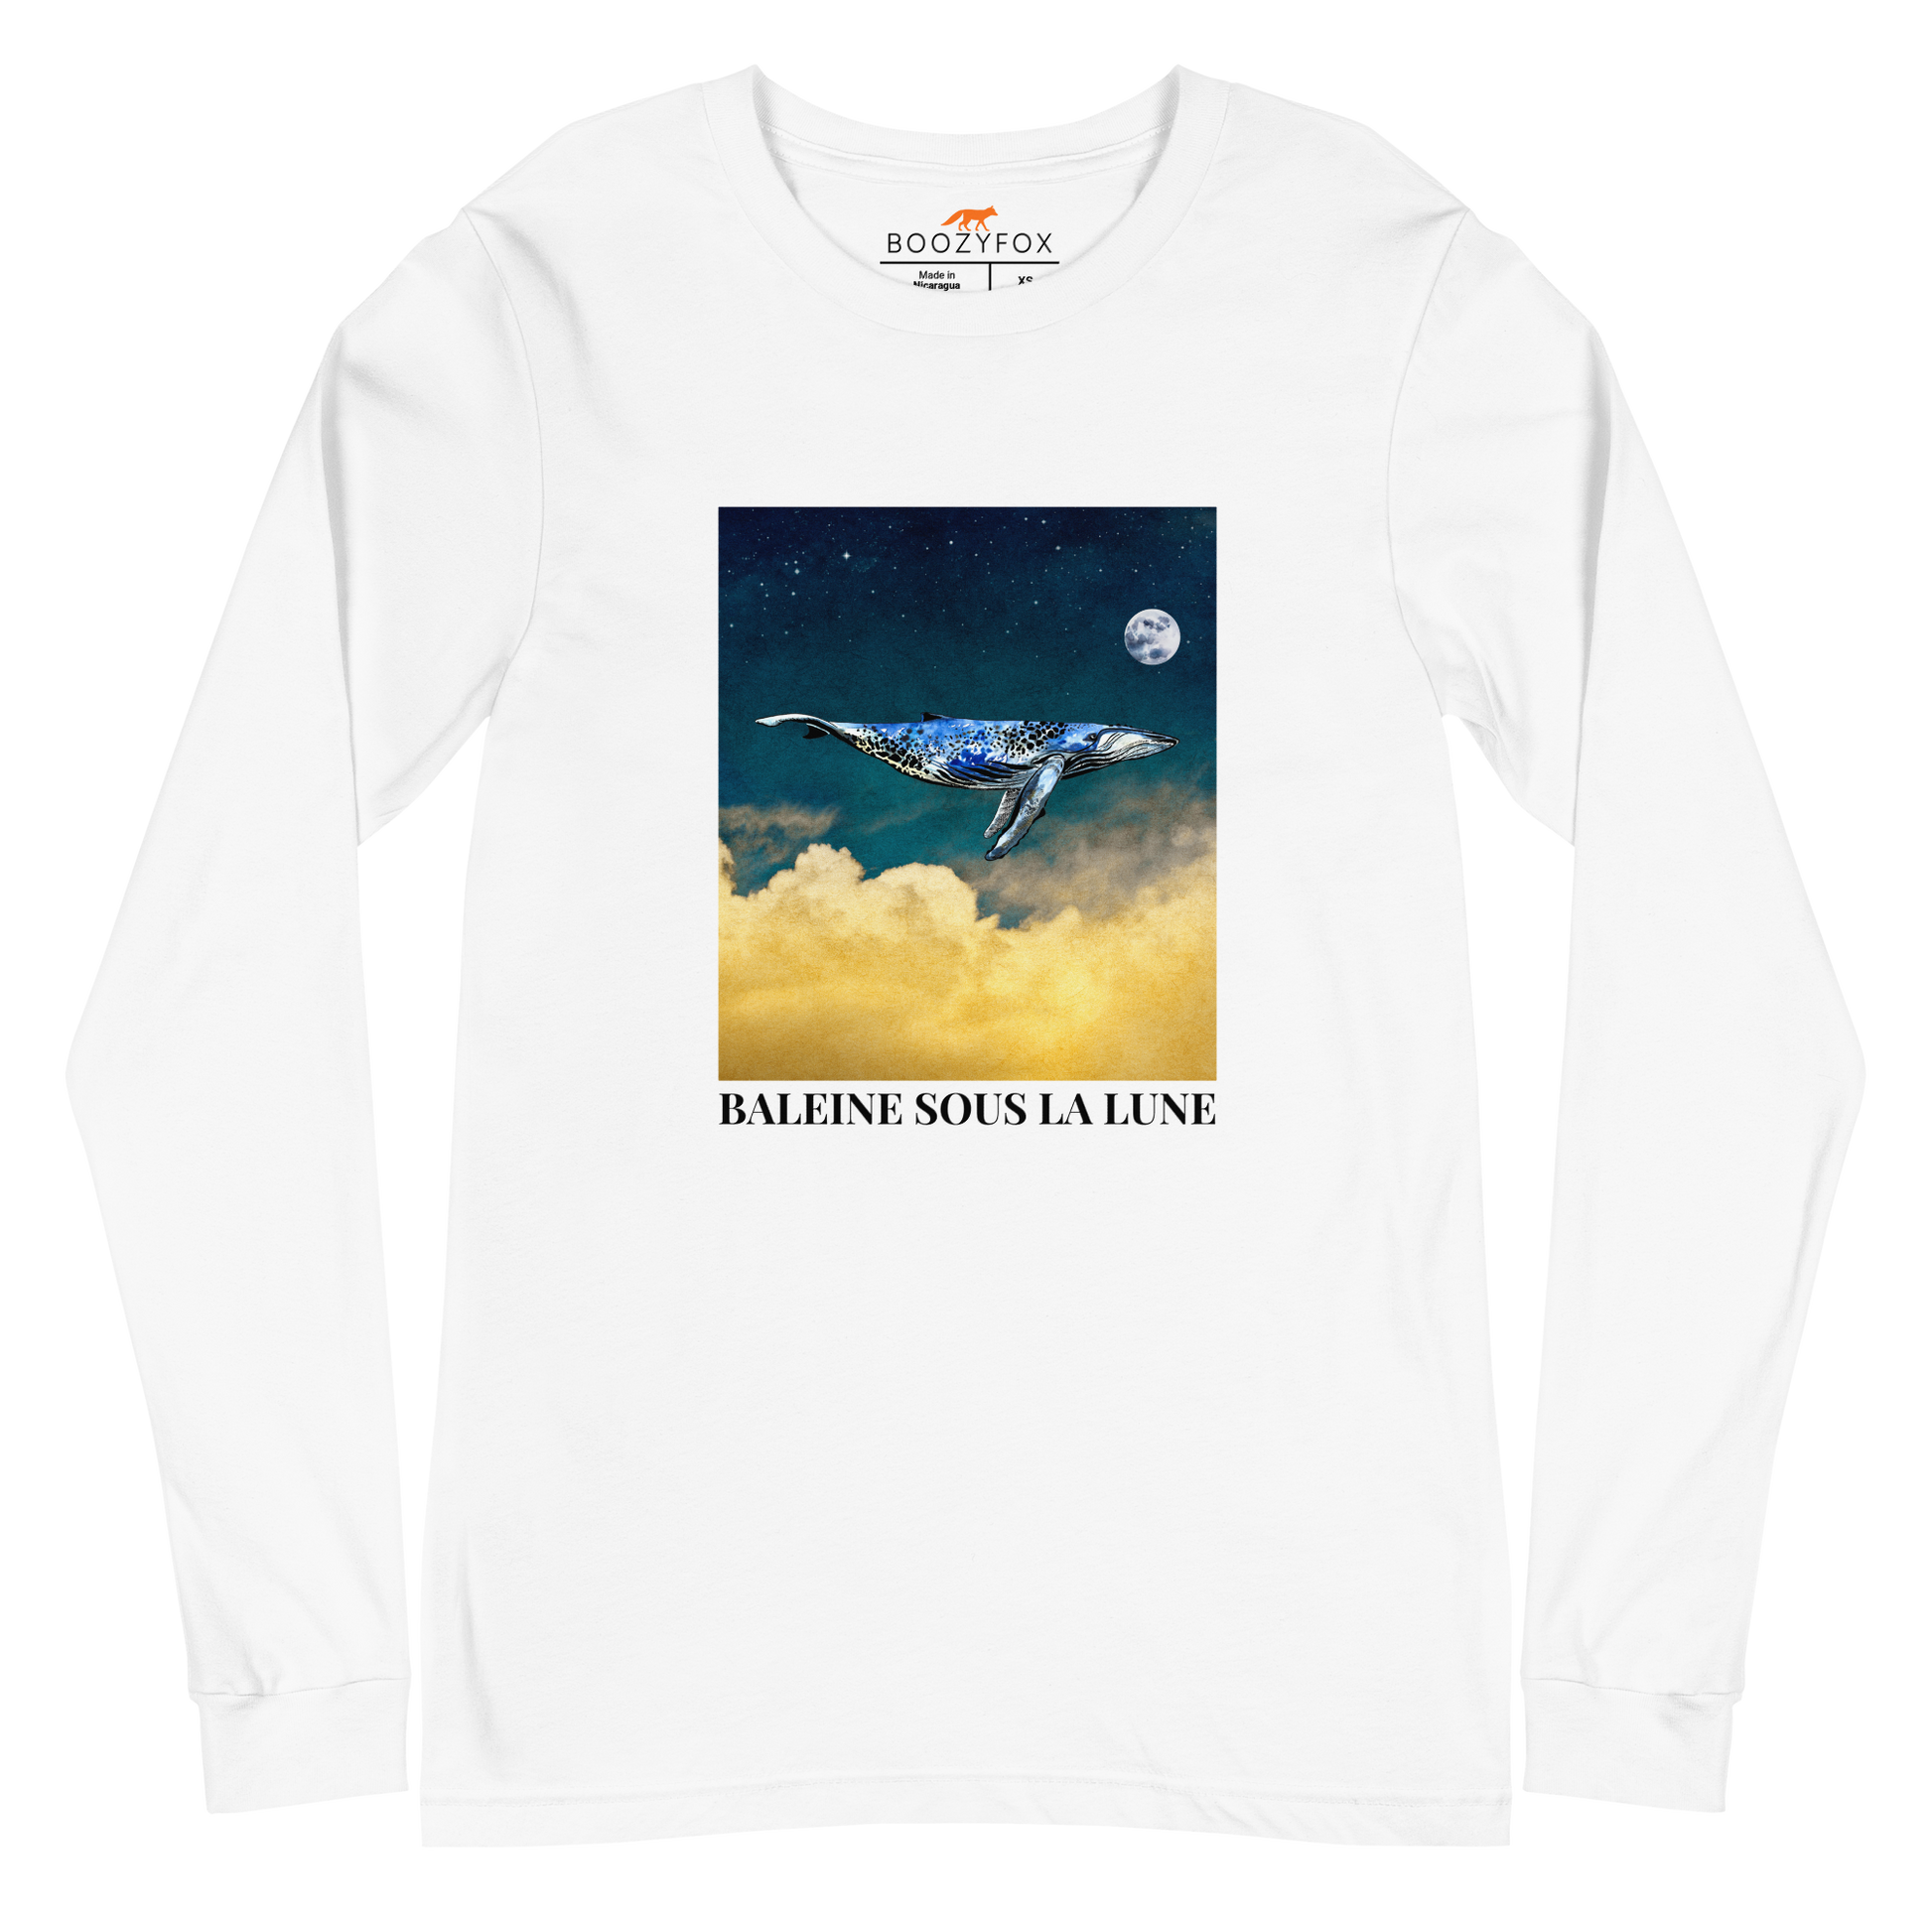 White Whale Long Sleeve Tee featuring a majestic Whale Under The Moon graphic on the chest - Cool Whale Long Sleeve Graphic Tees - Boozy Fox